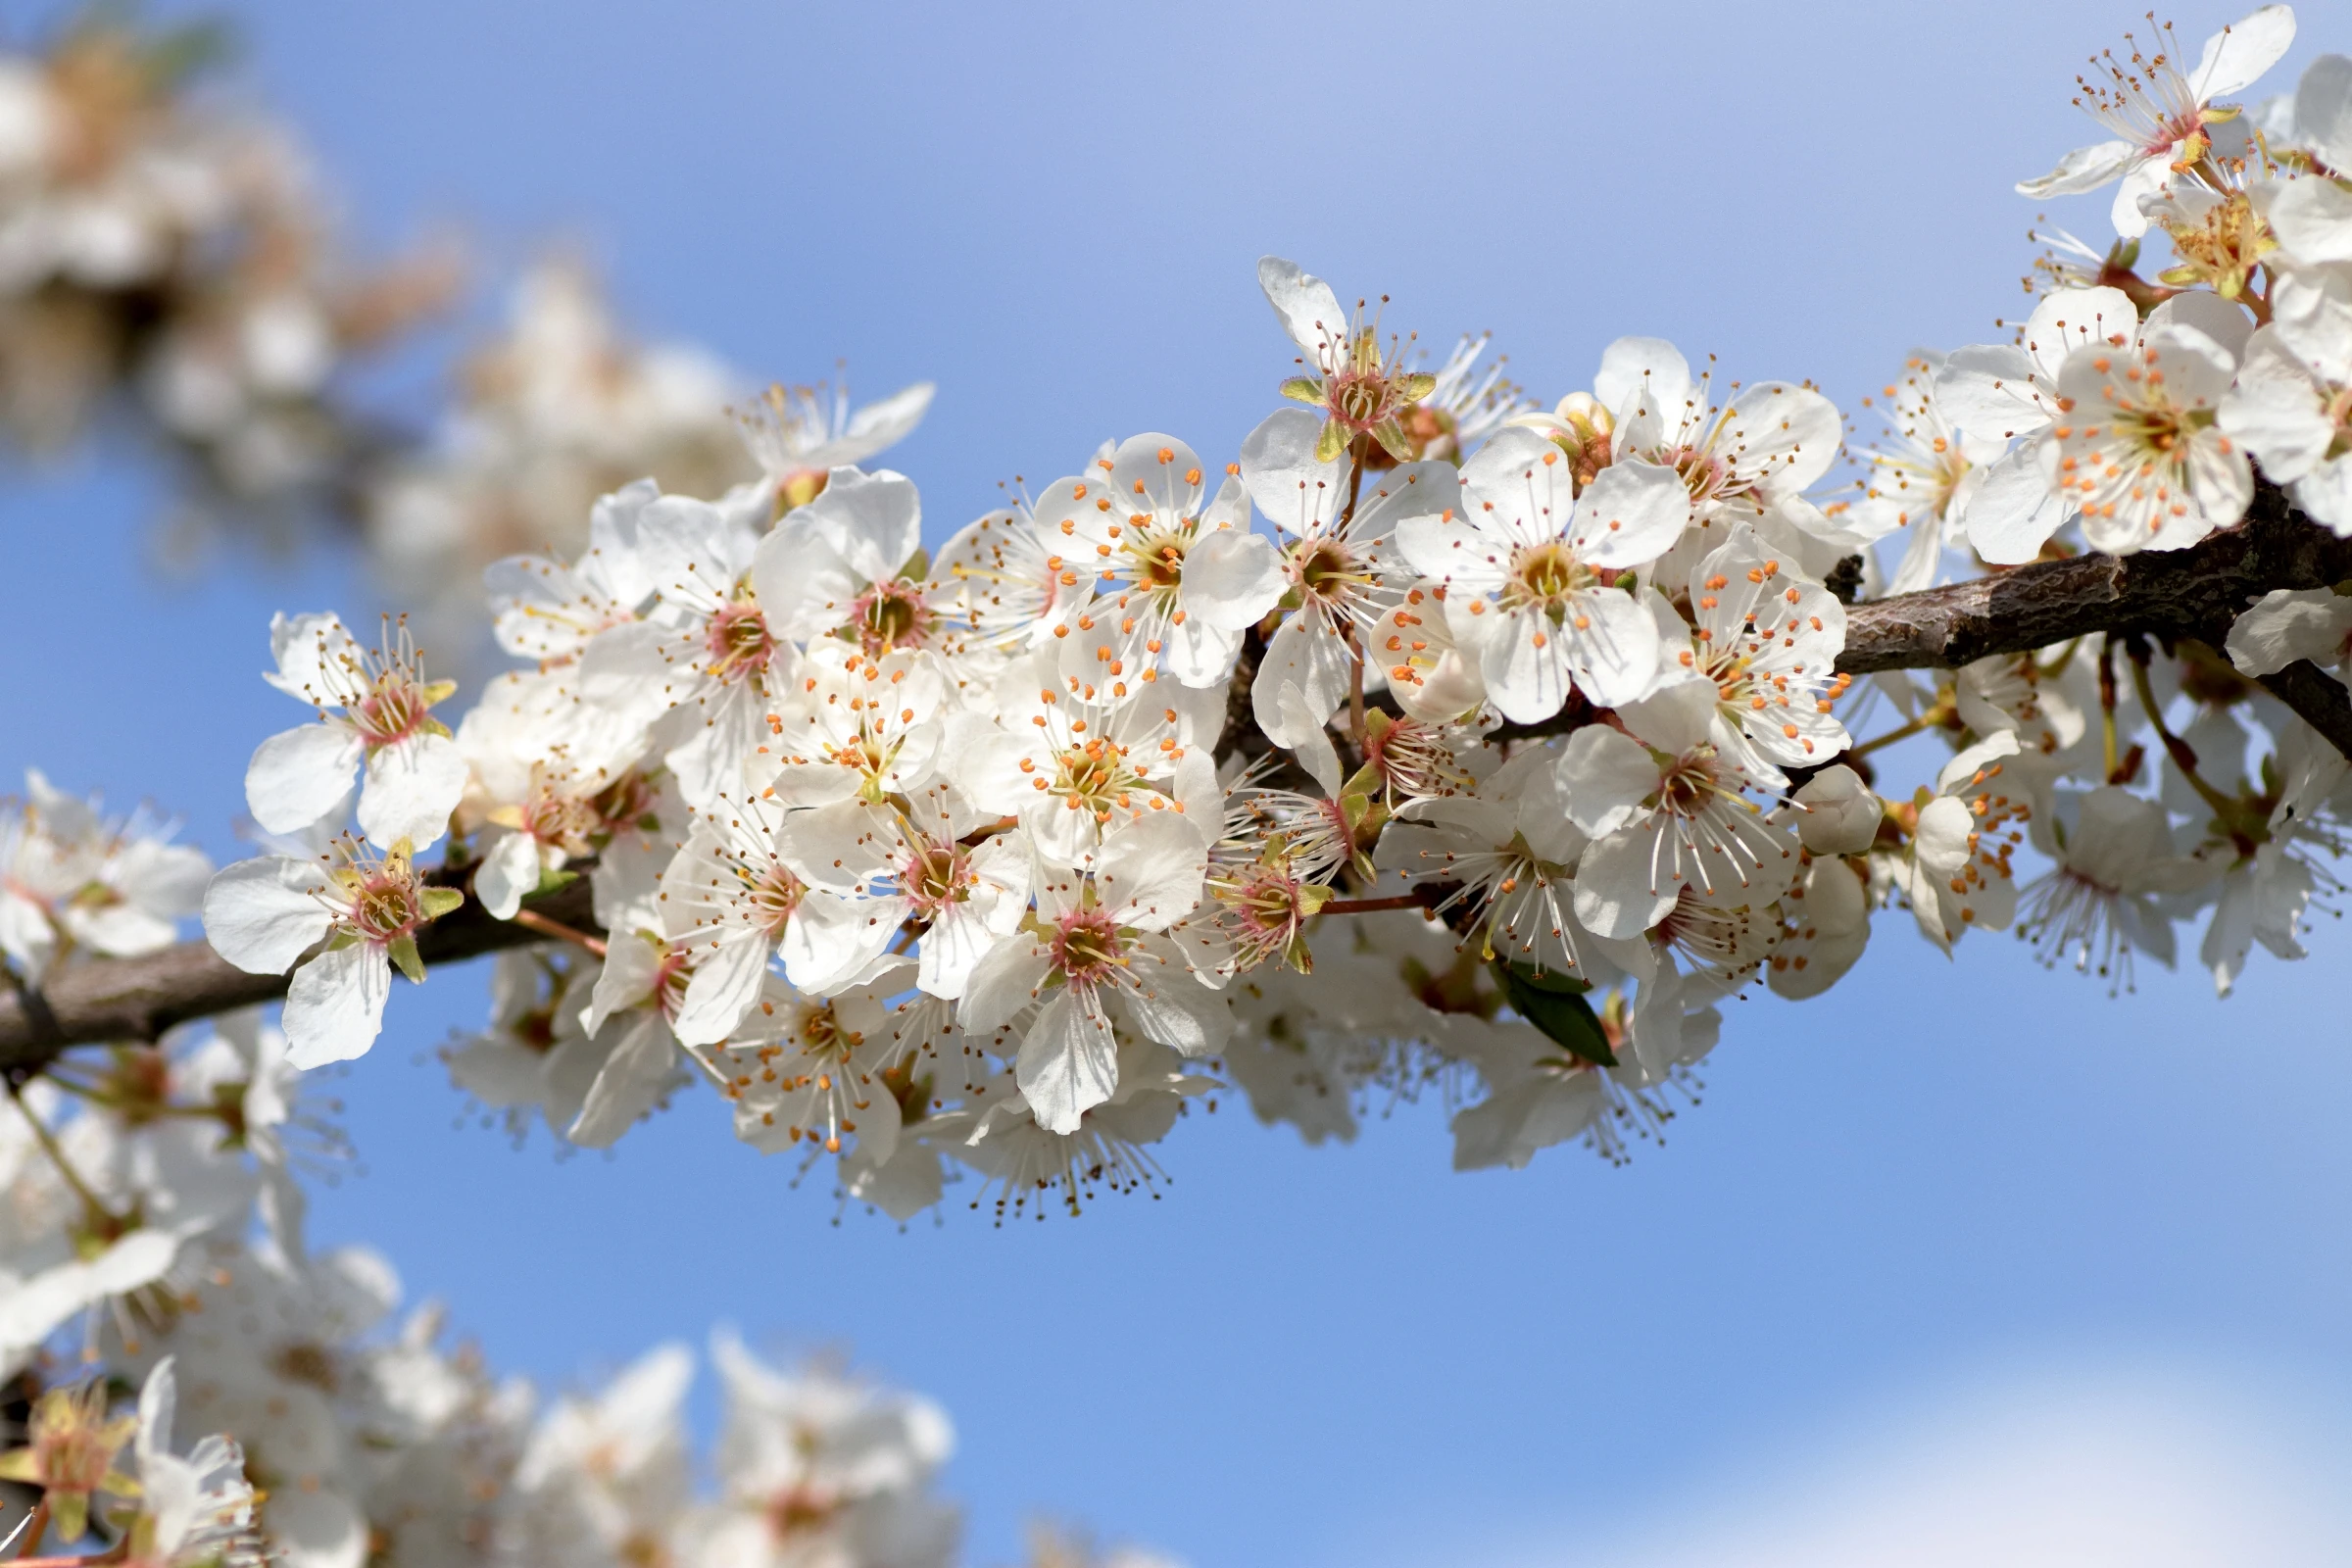 Cherry plum - In the centre, an inflorescence runs through the picture from left to right. It is a cluster of flowers on a branch. The individual flowers are white in colour and have yellow-orange stamens.